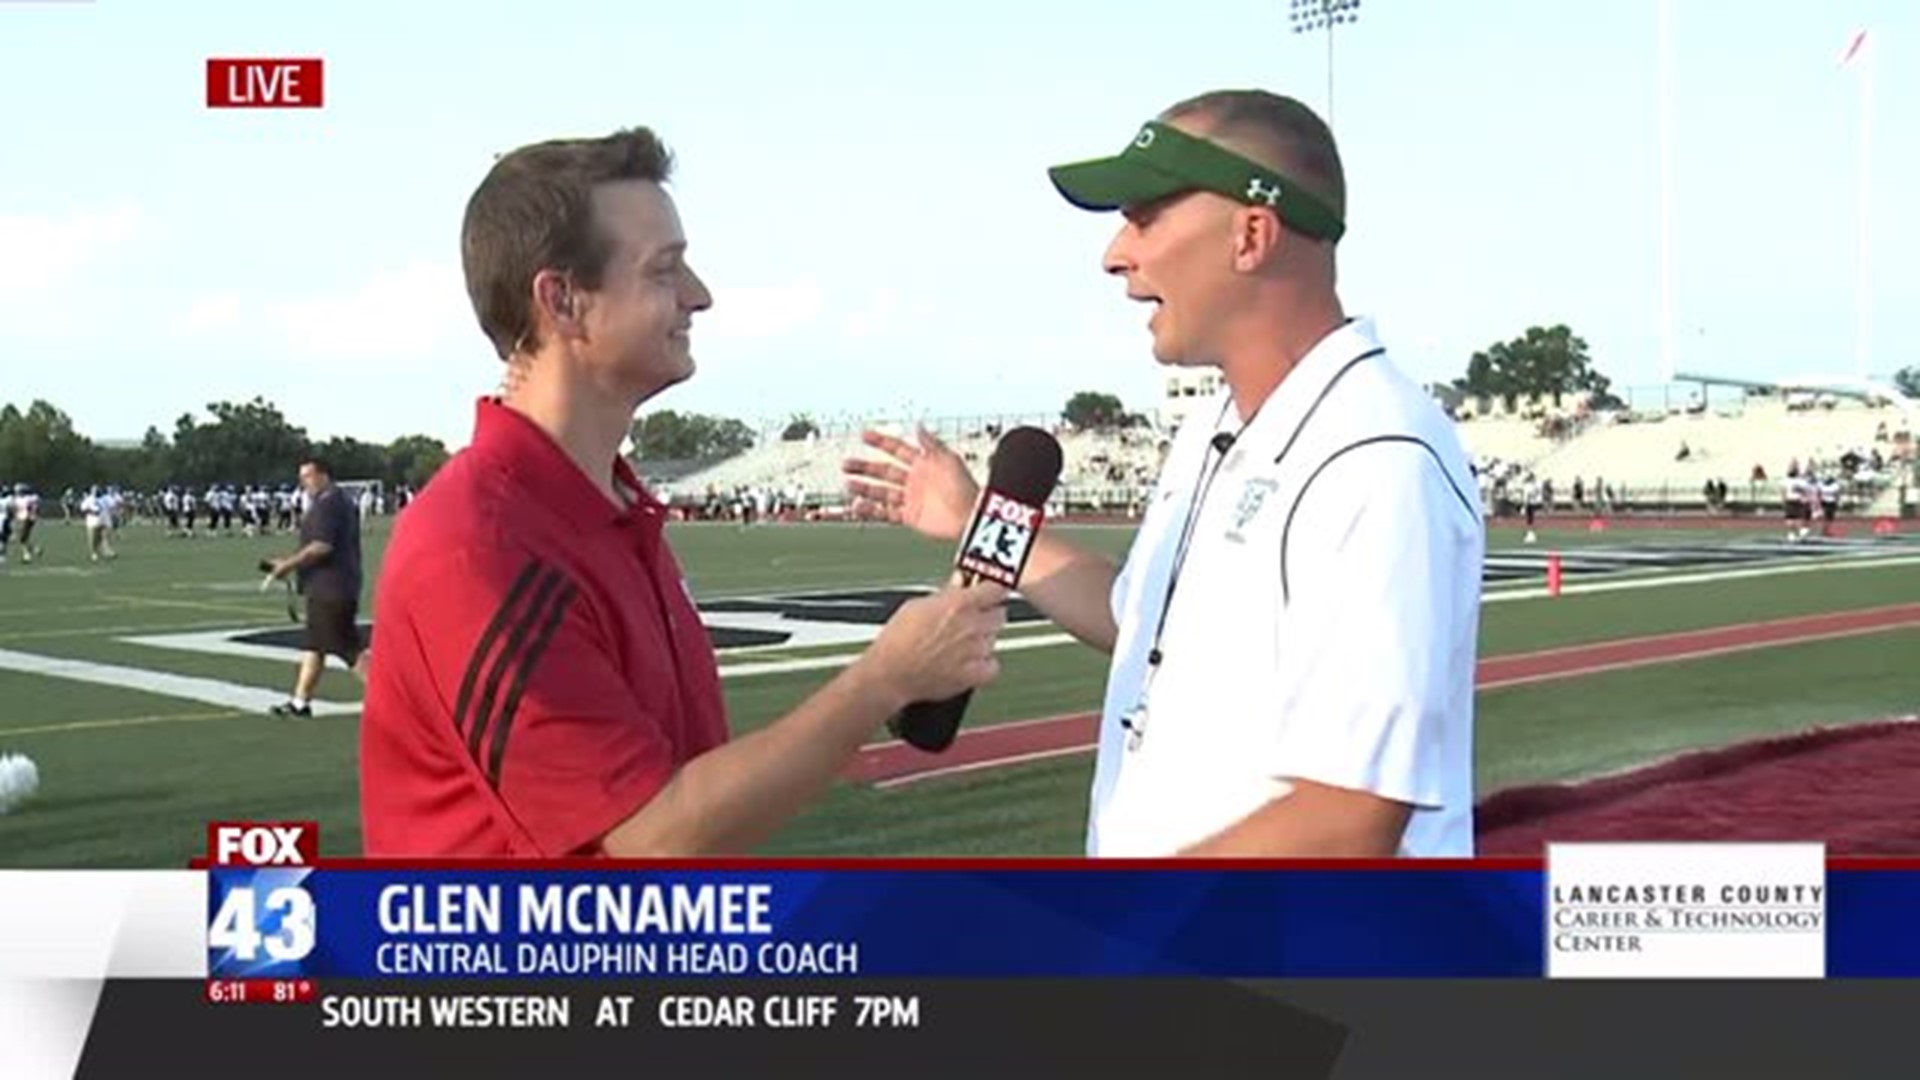 HSFF Interview with Central Dauphin Head Coach Glen McNamee